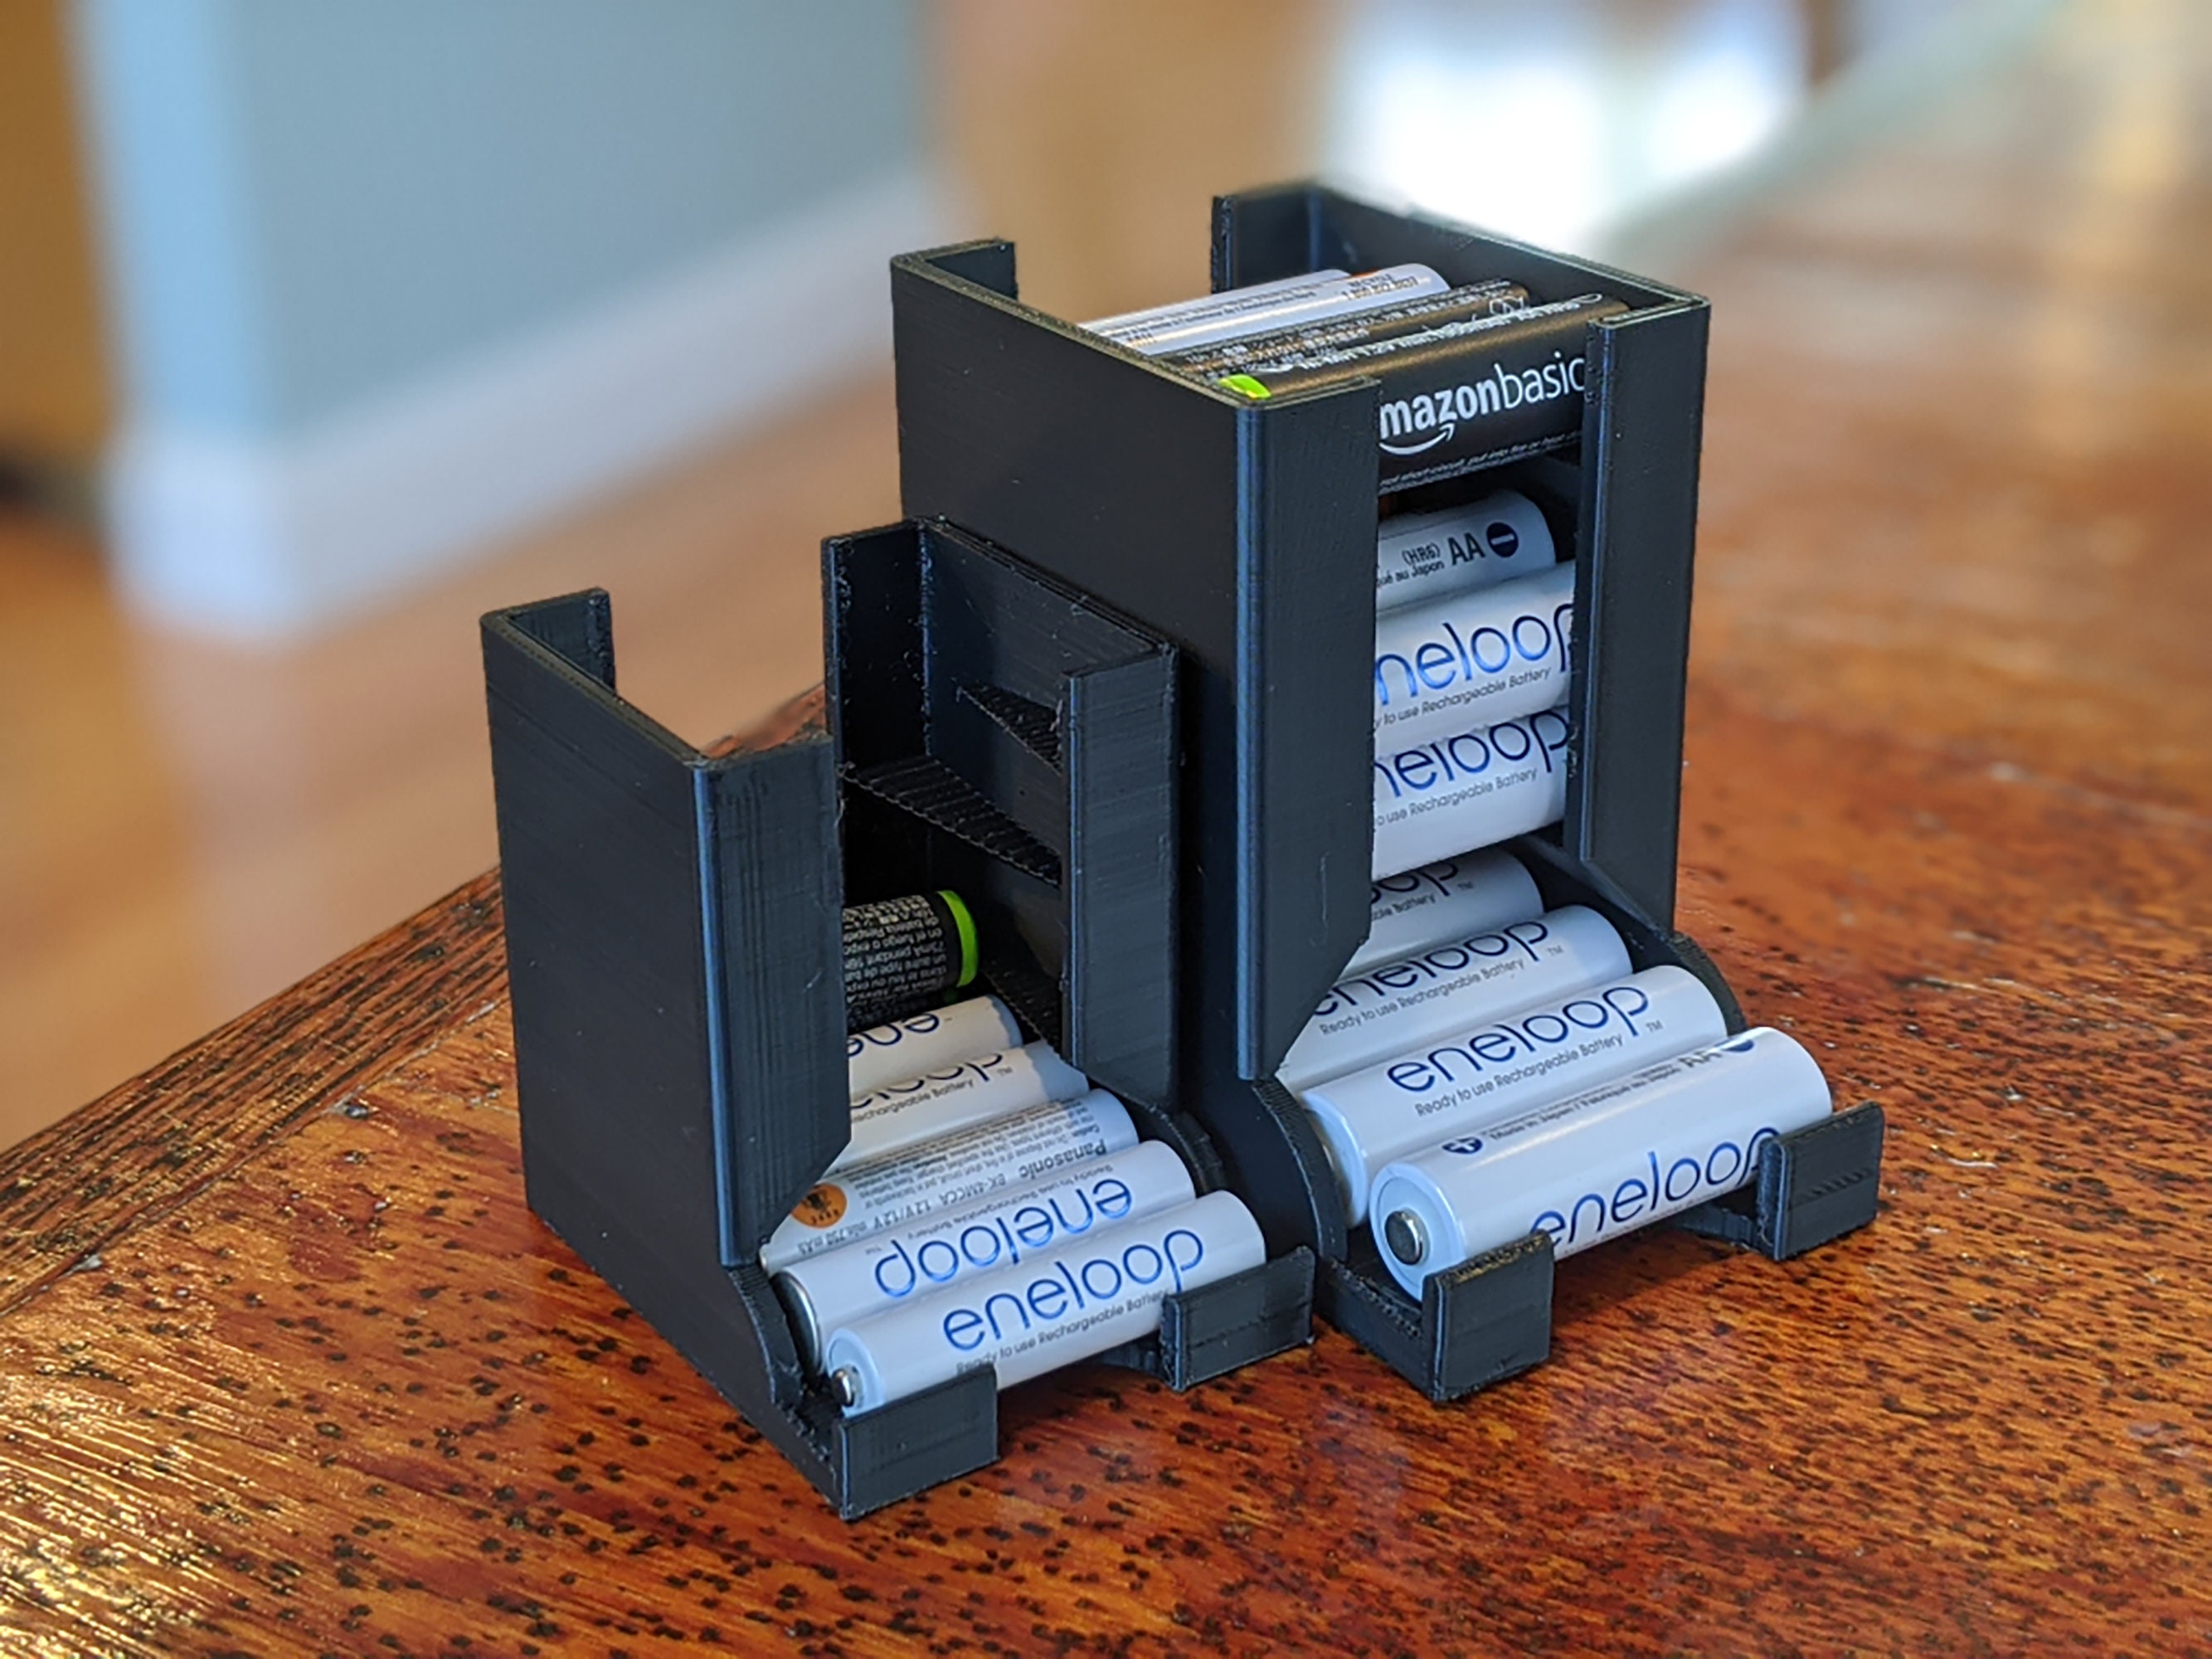 Battery Daddy holders for 2032 & 357 size batteries by InqEnzo, Download  free STL model